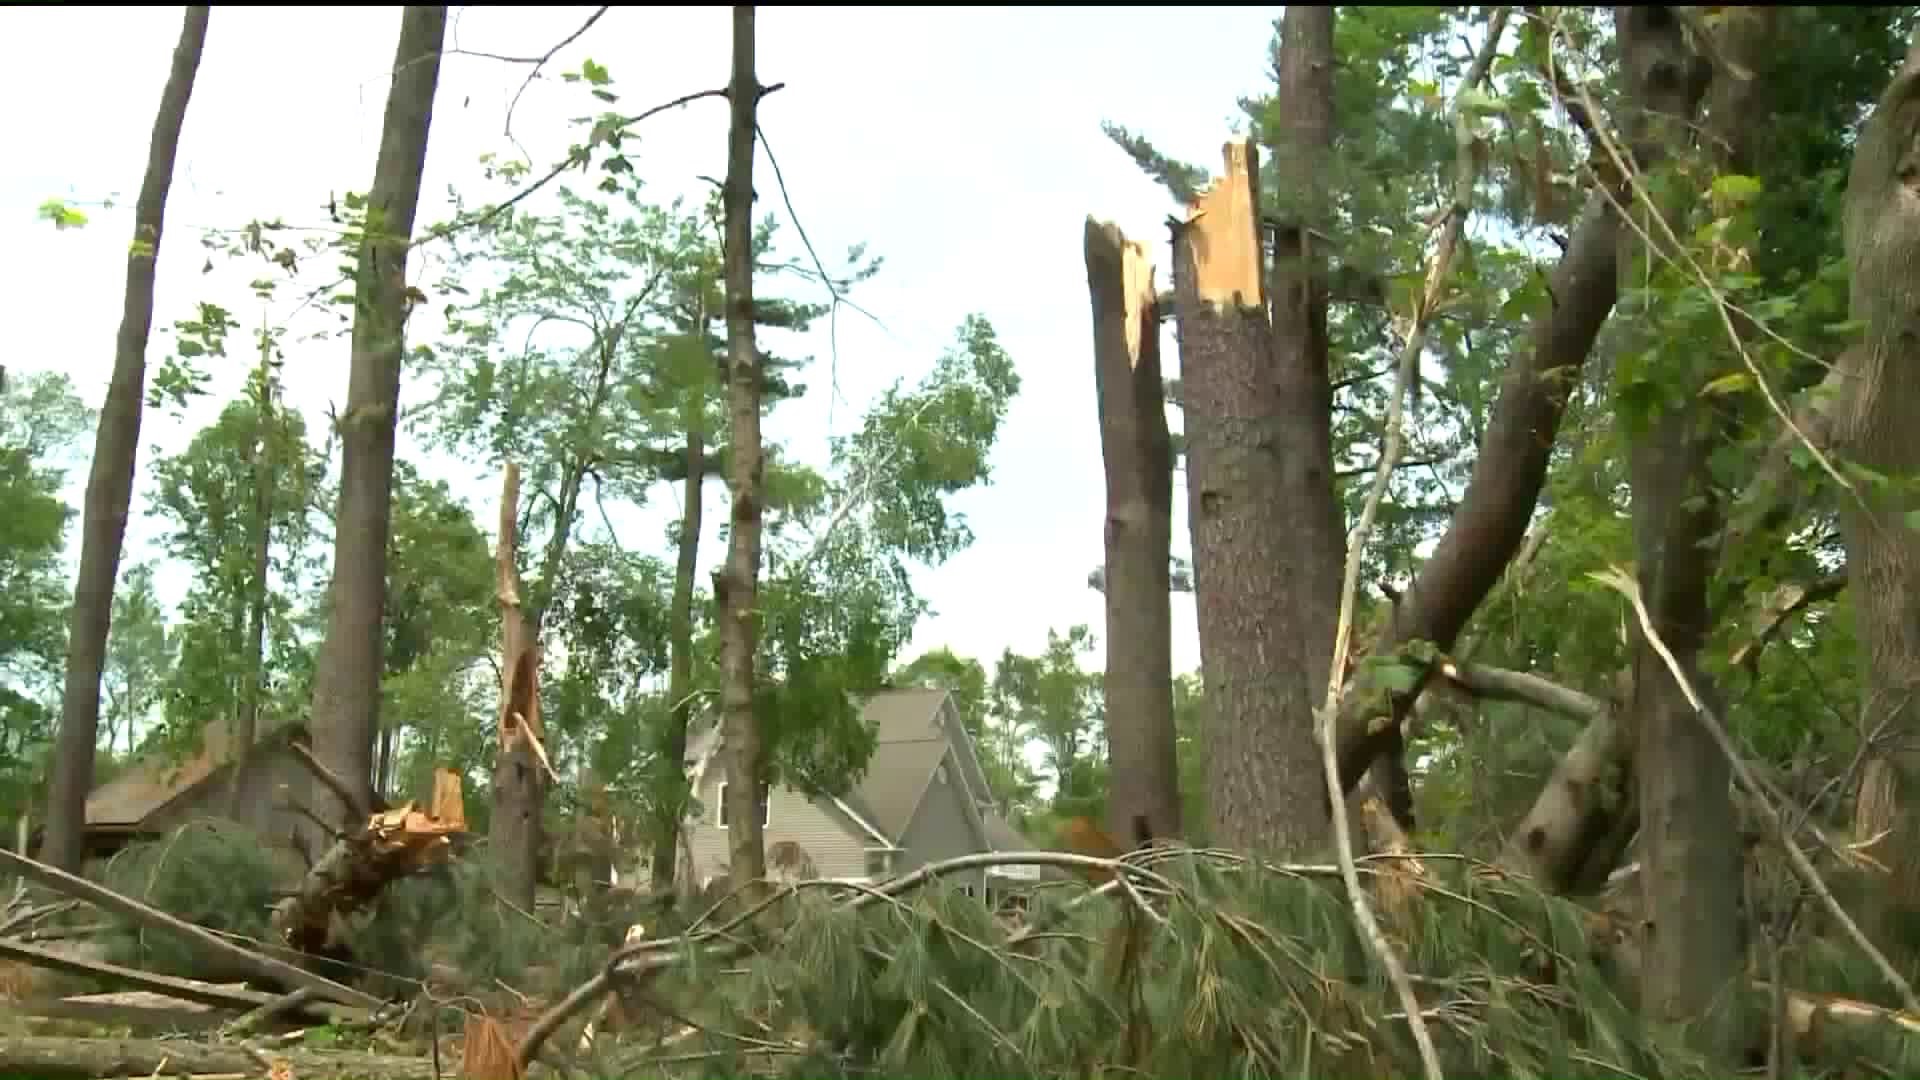 Bill to provide FEMA aid for fallen trees in CT